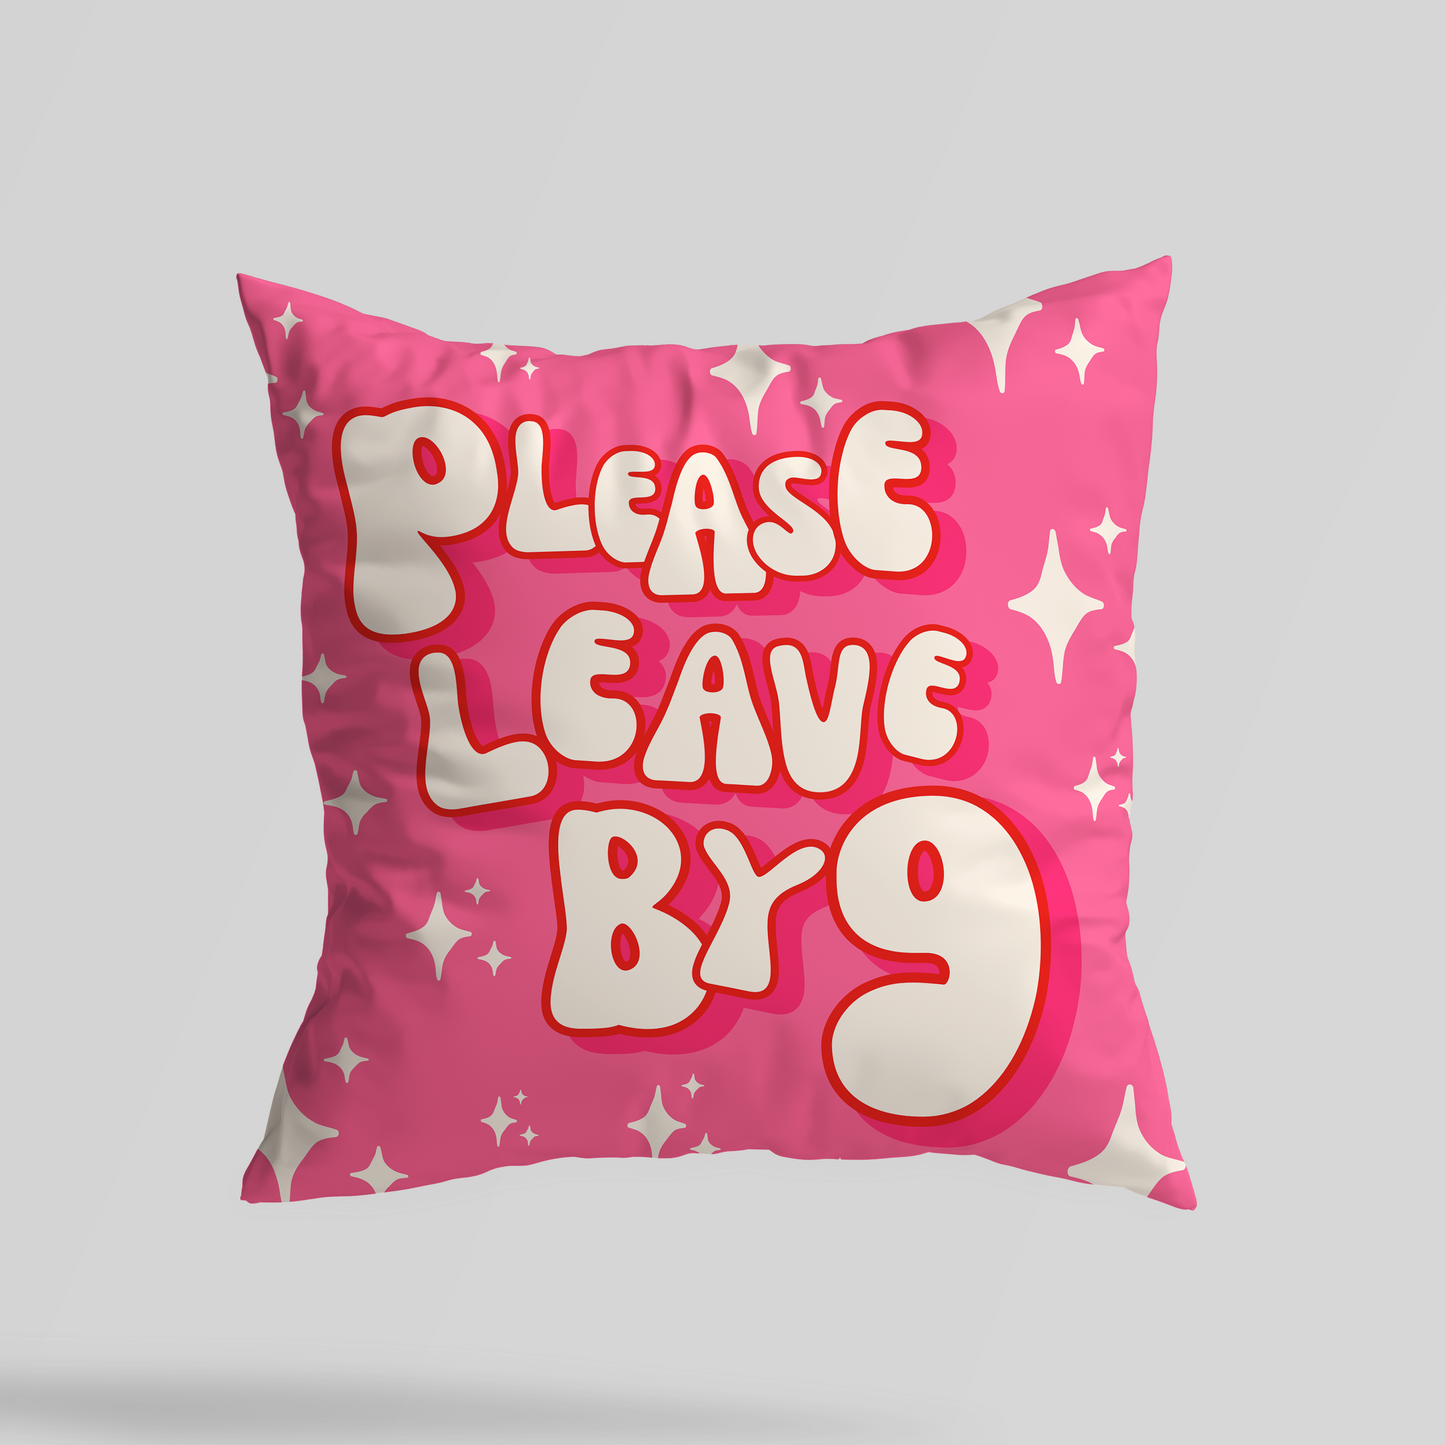 Please leave by 9 Throw Pillow